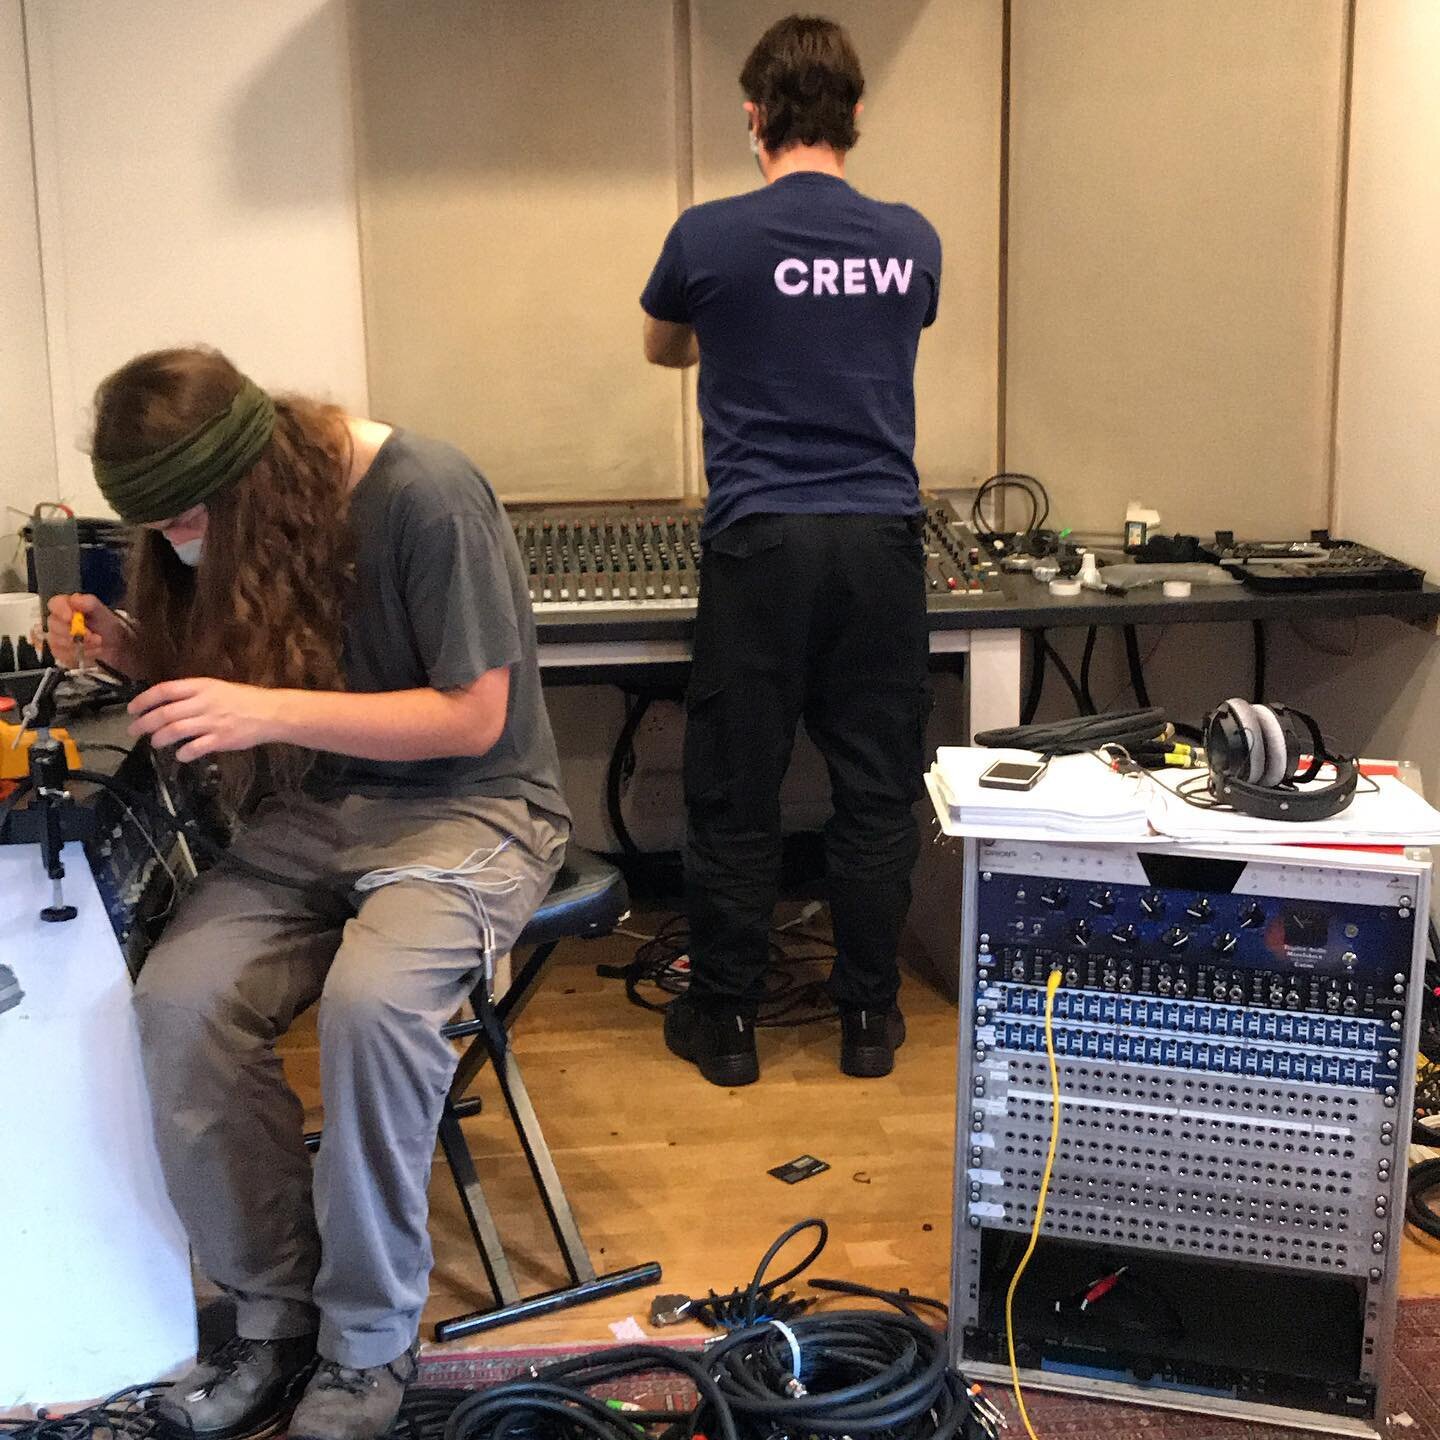 Install day number ?? We&rsquo;re working hard to get the studio back up and running to get back to recording! #recordingstudio #studio #sessions #soldering #ipswich #maintenance